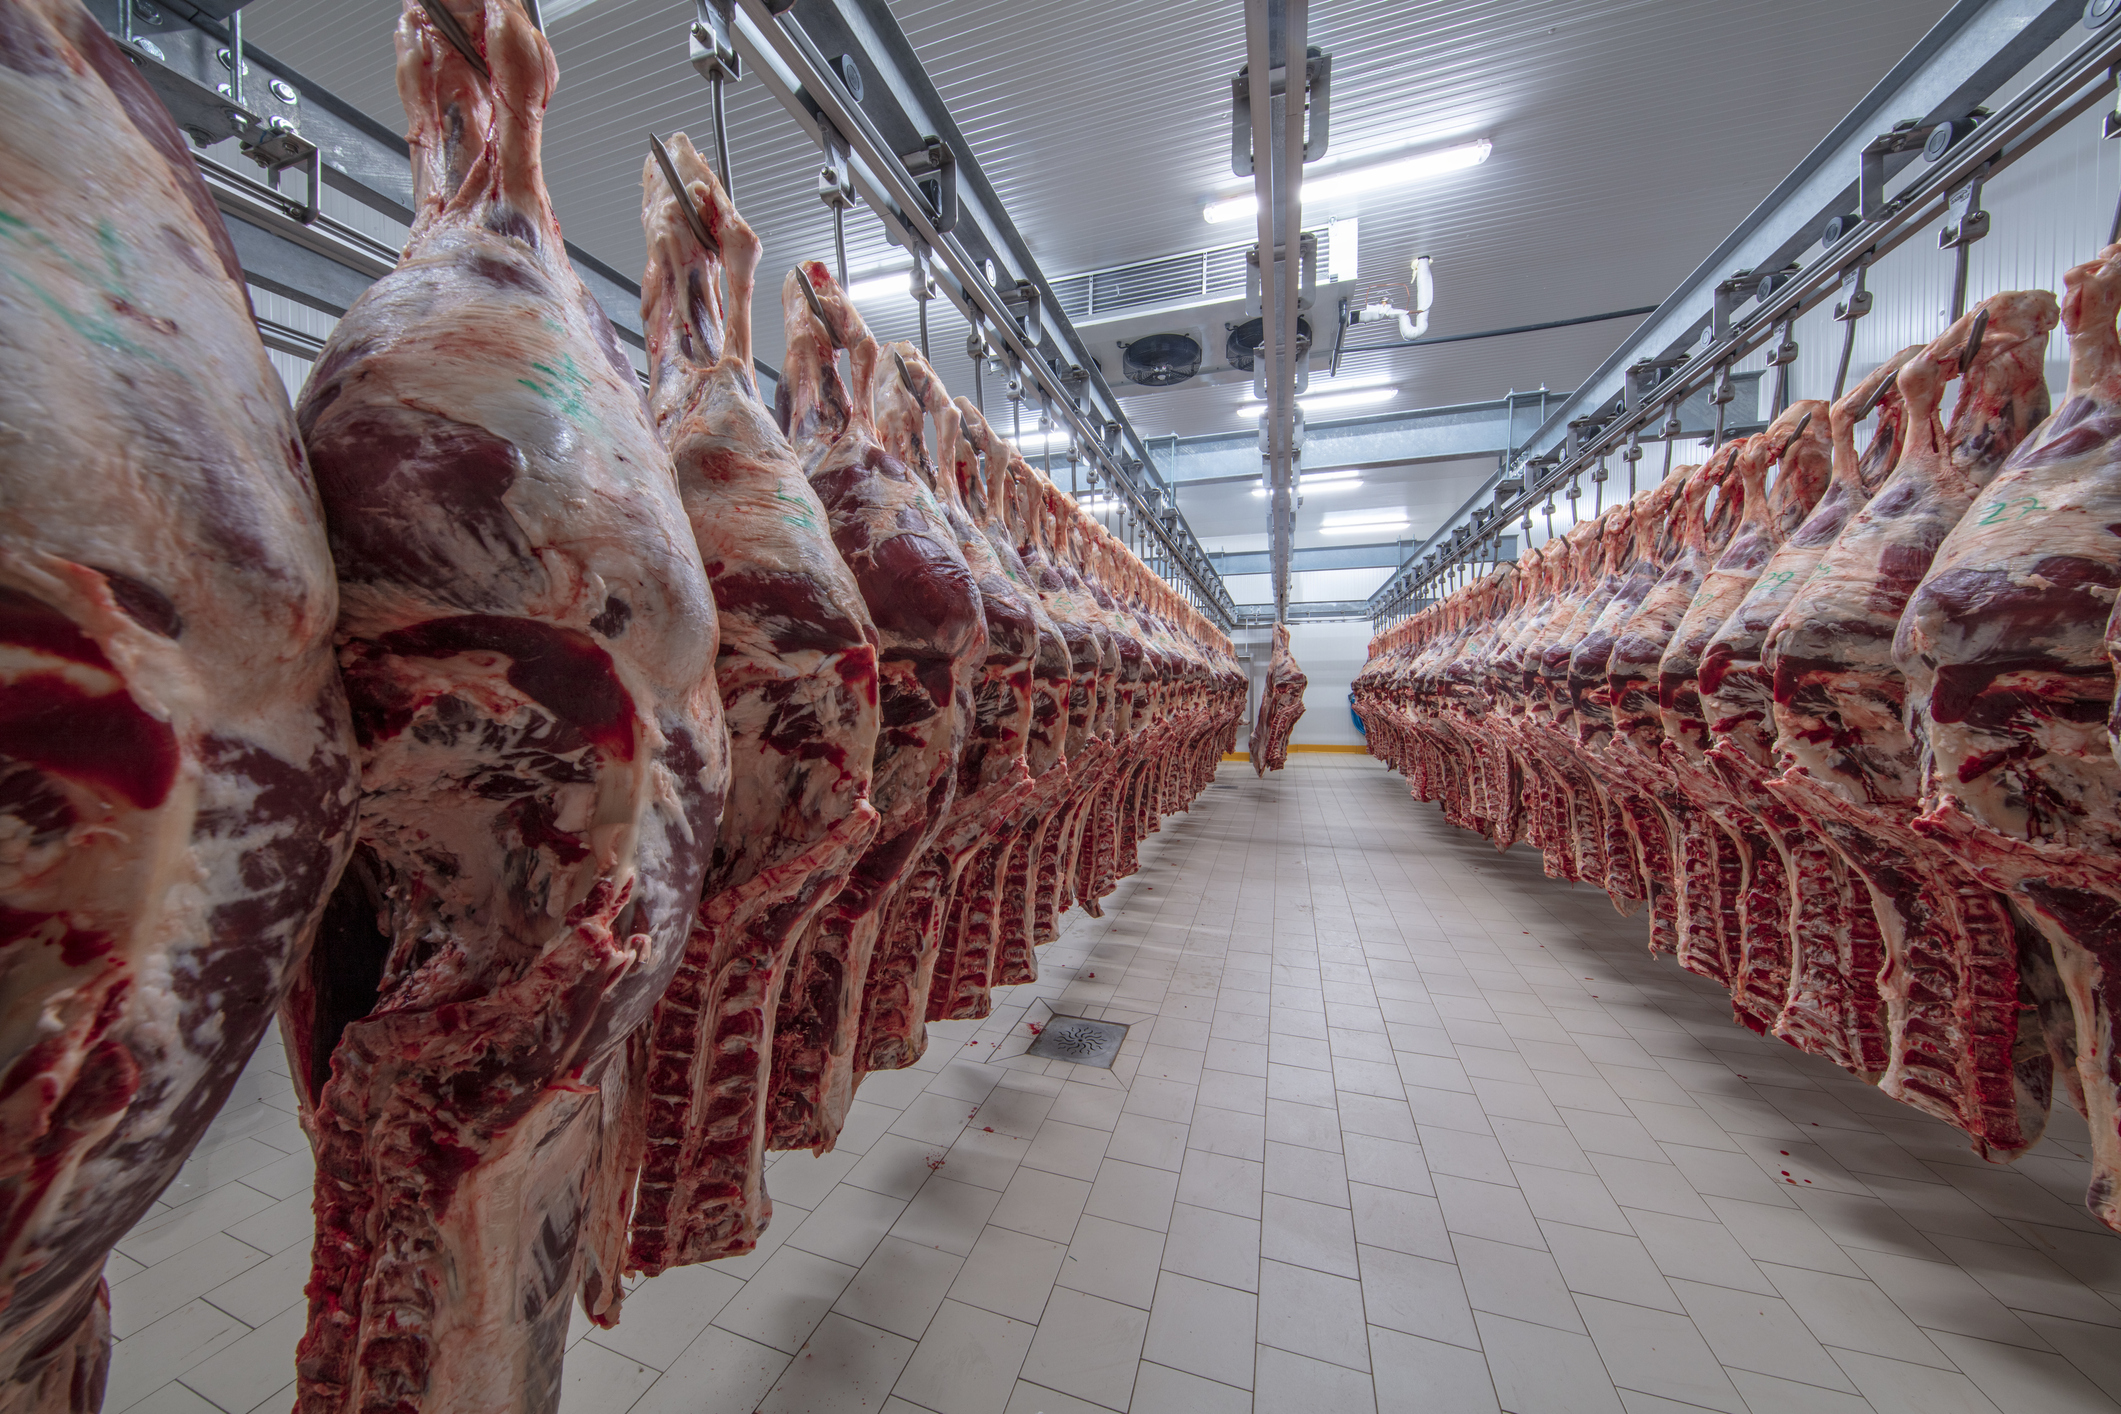 Meat industry, meats hanging in the cold storage. (Photo: iStock - asikkk)